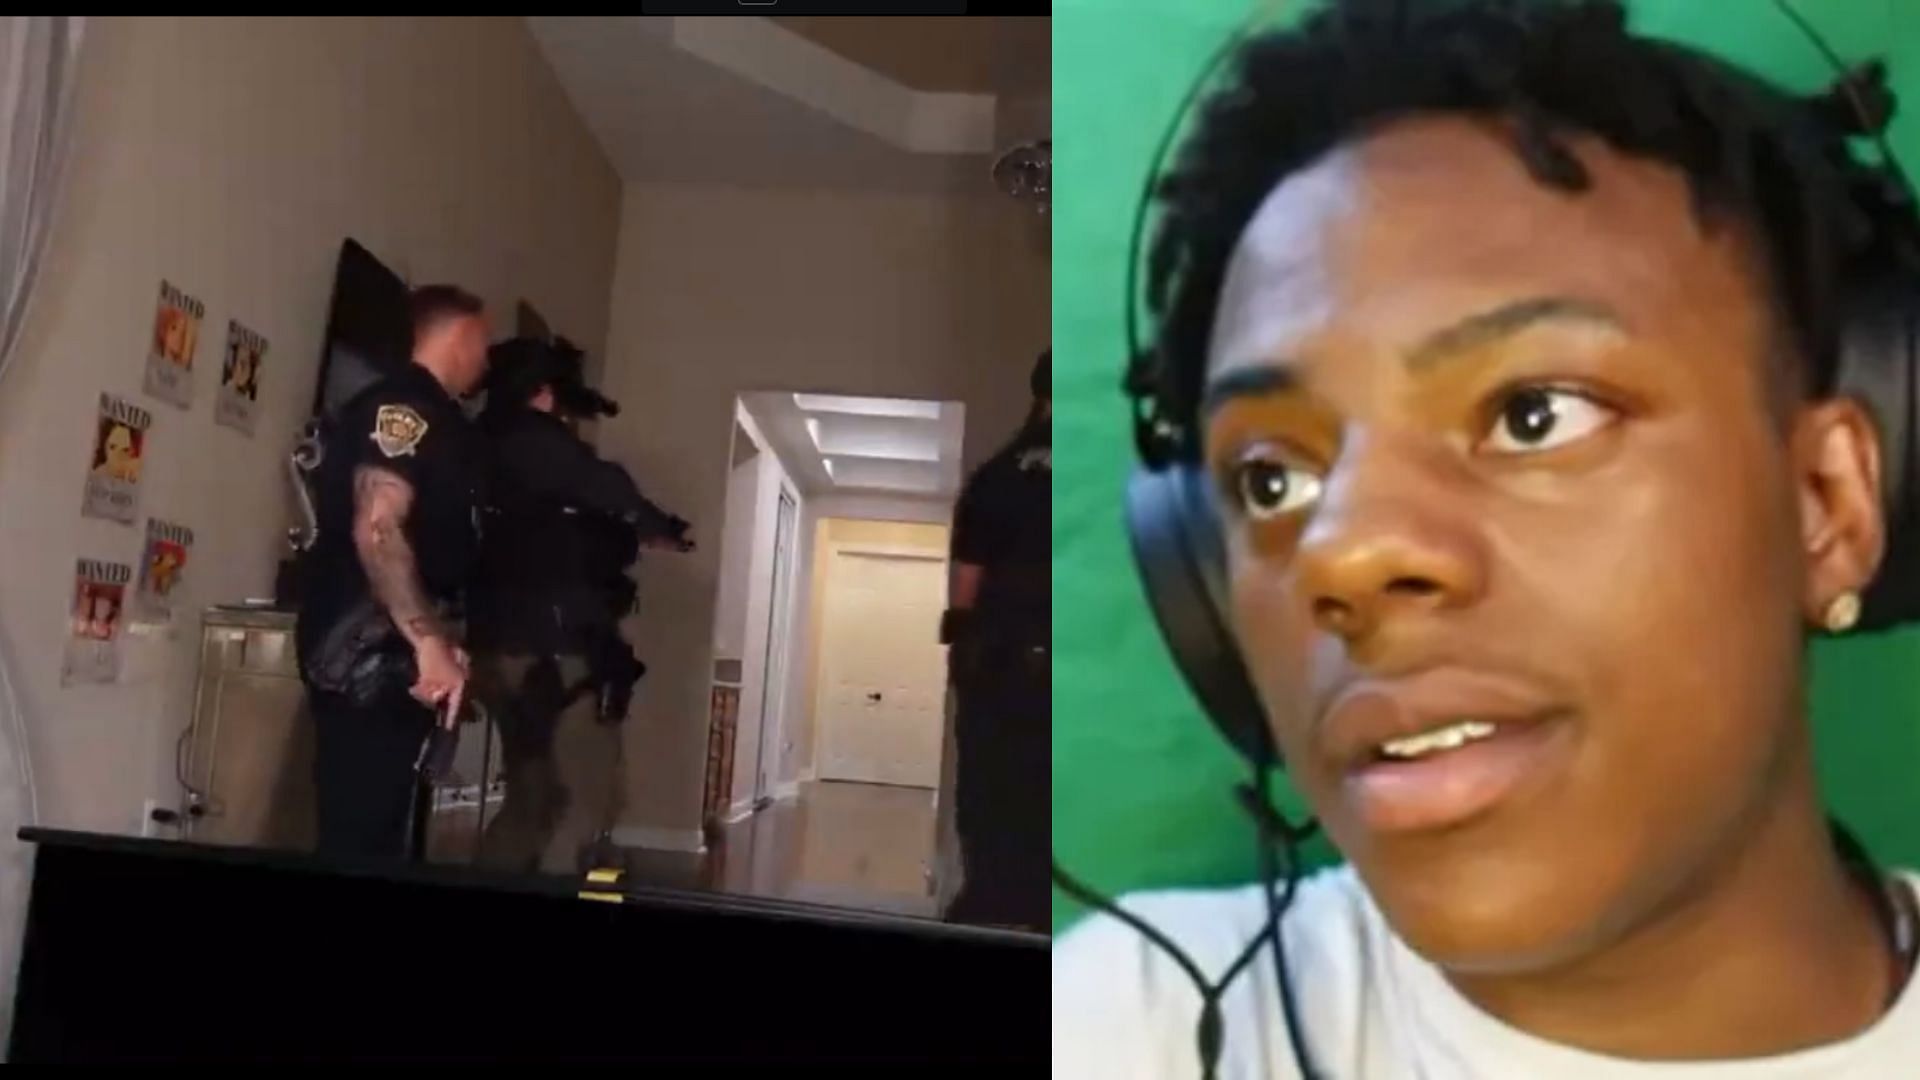 IShowSpeed's house gets stormed by SWAT team during live steam